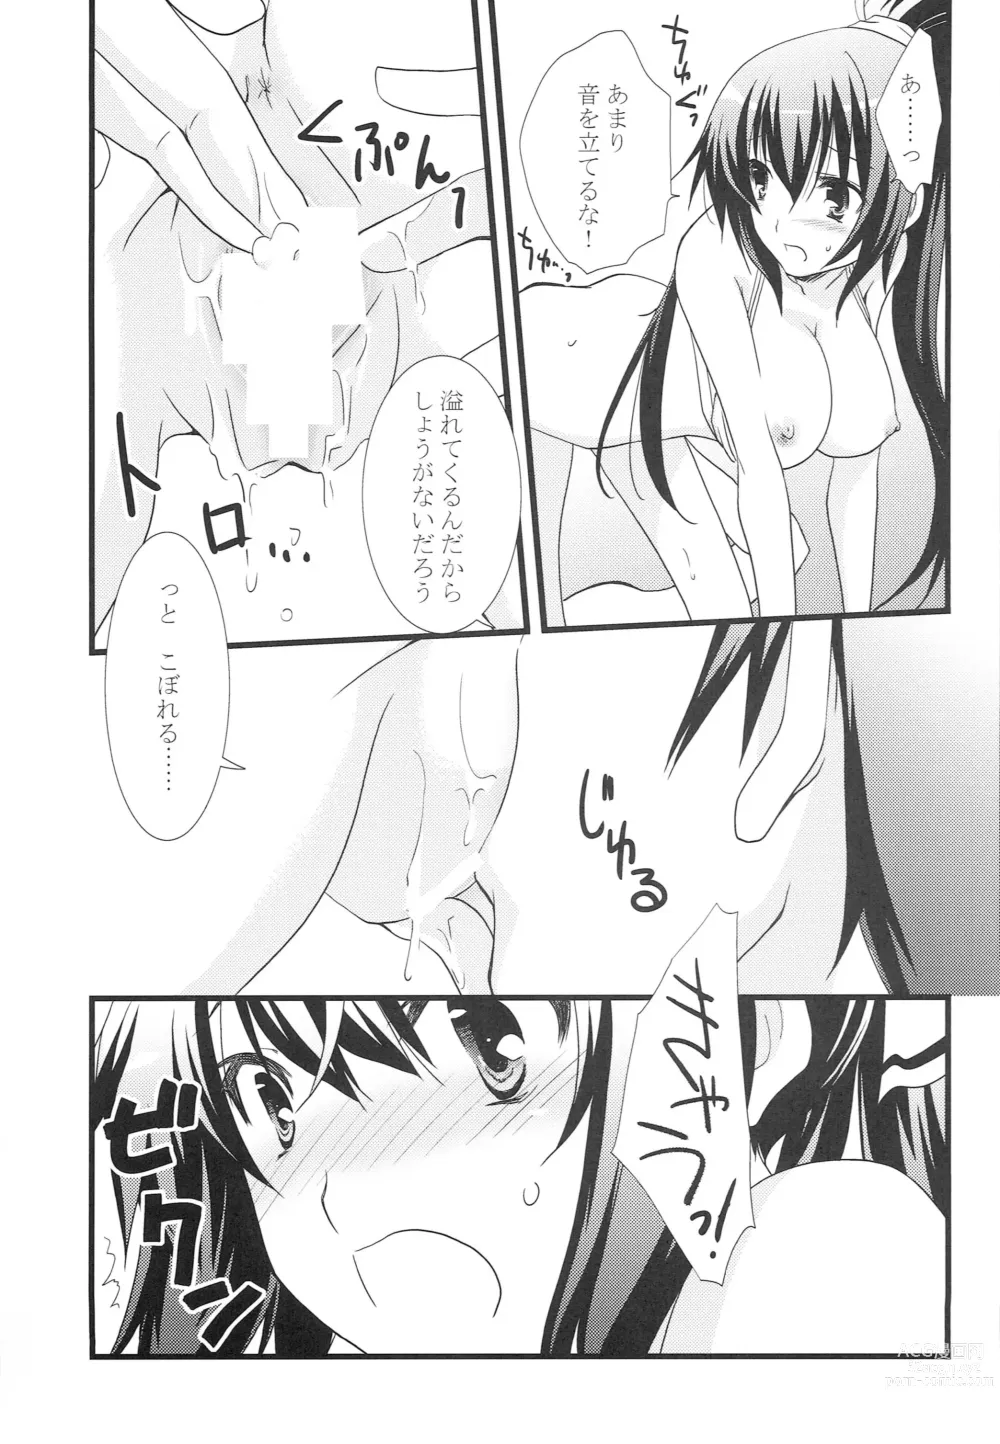 Page 16 of doujinshi Summer Dream